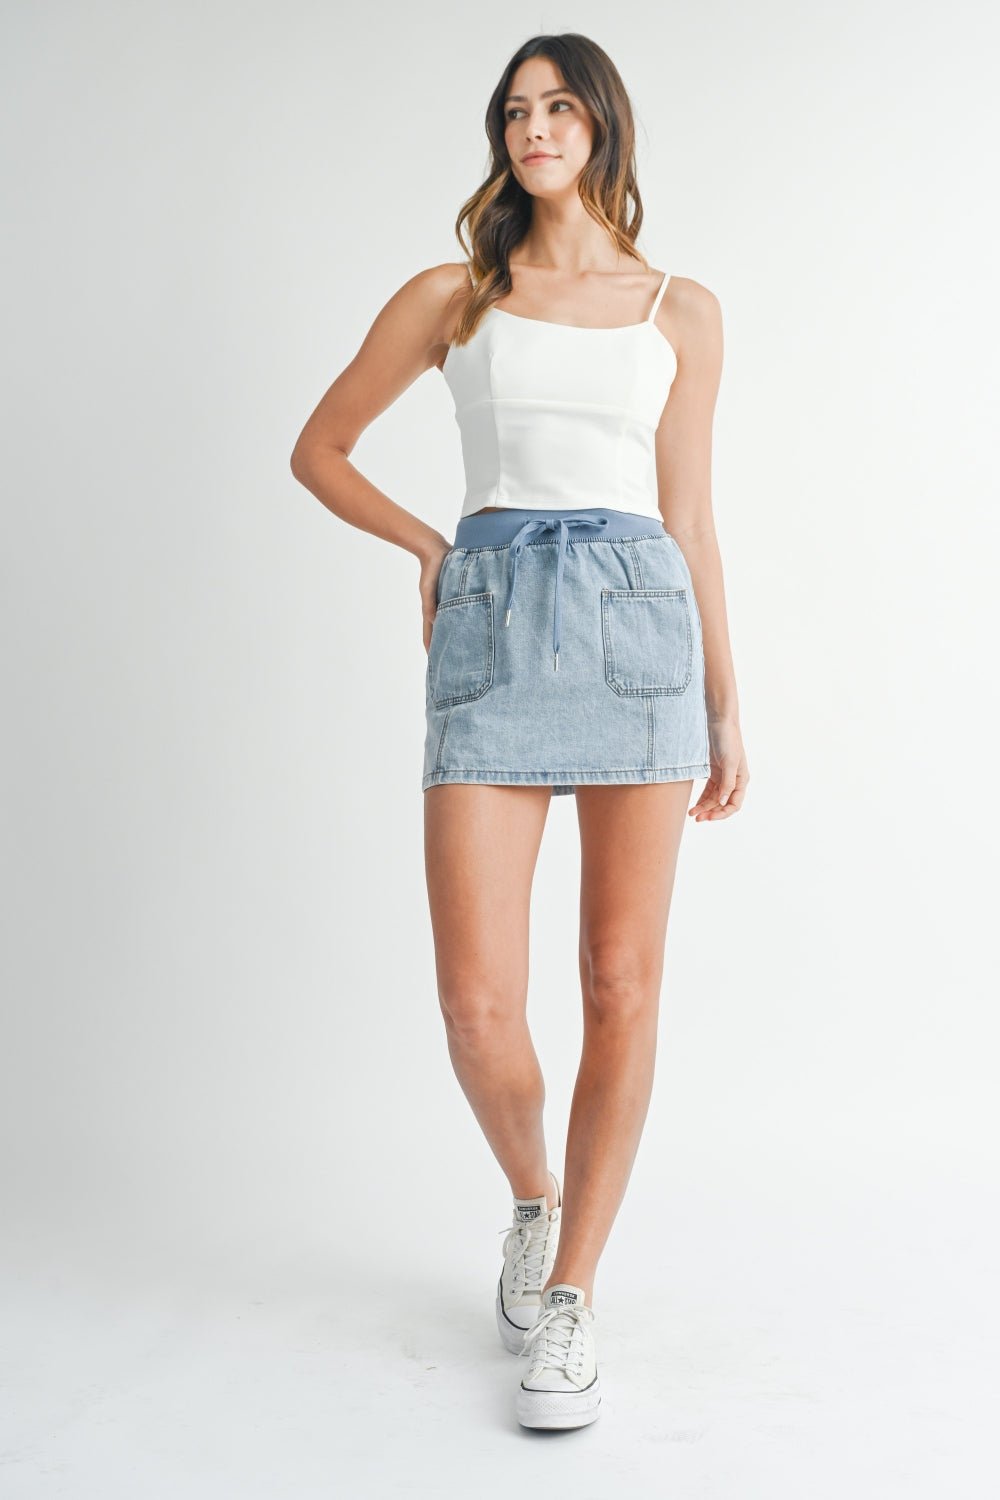 Strappy Back Cropped Sleeveless Cami in Off-WhiteCamisoleMable